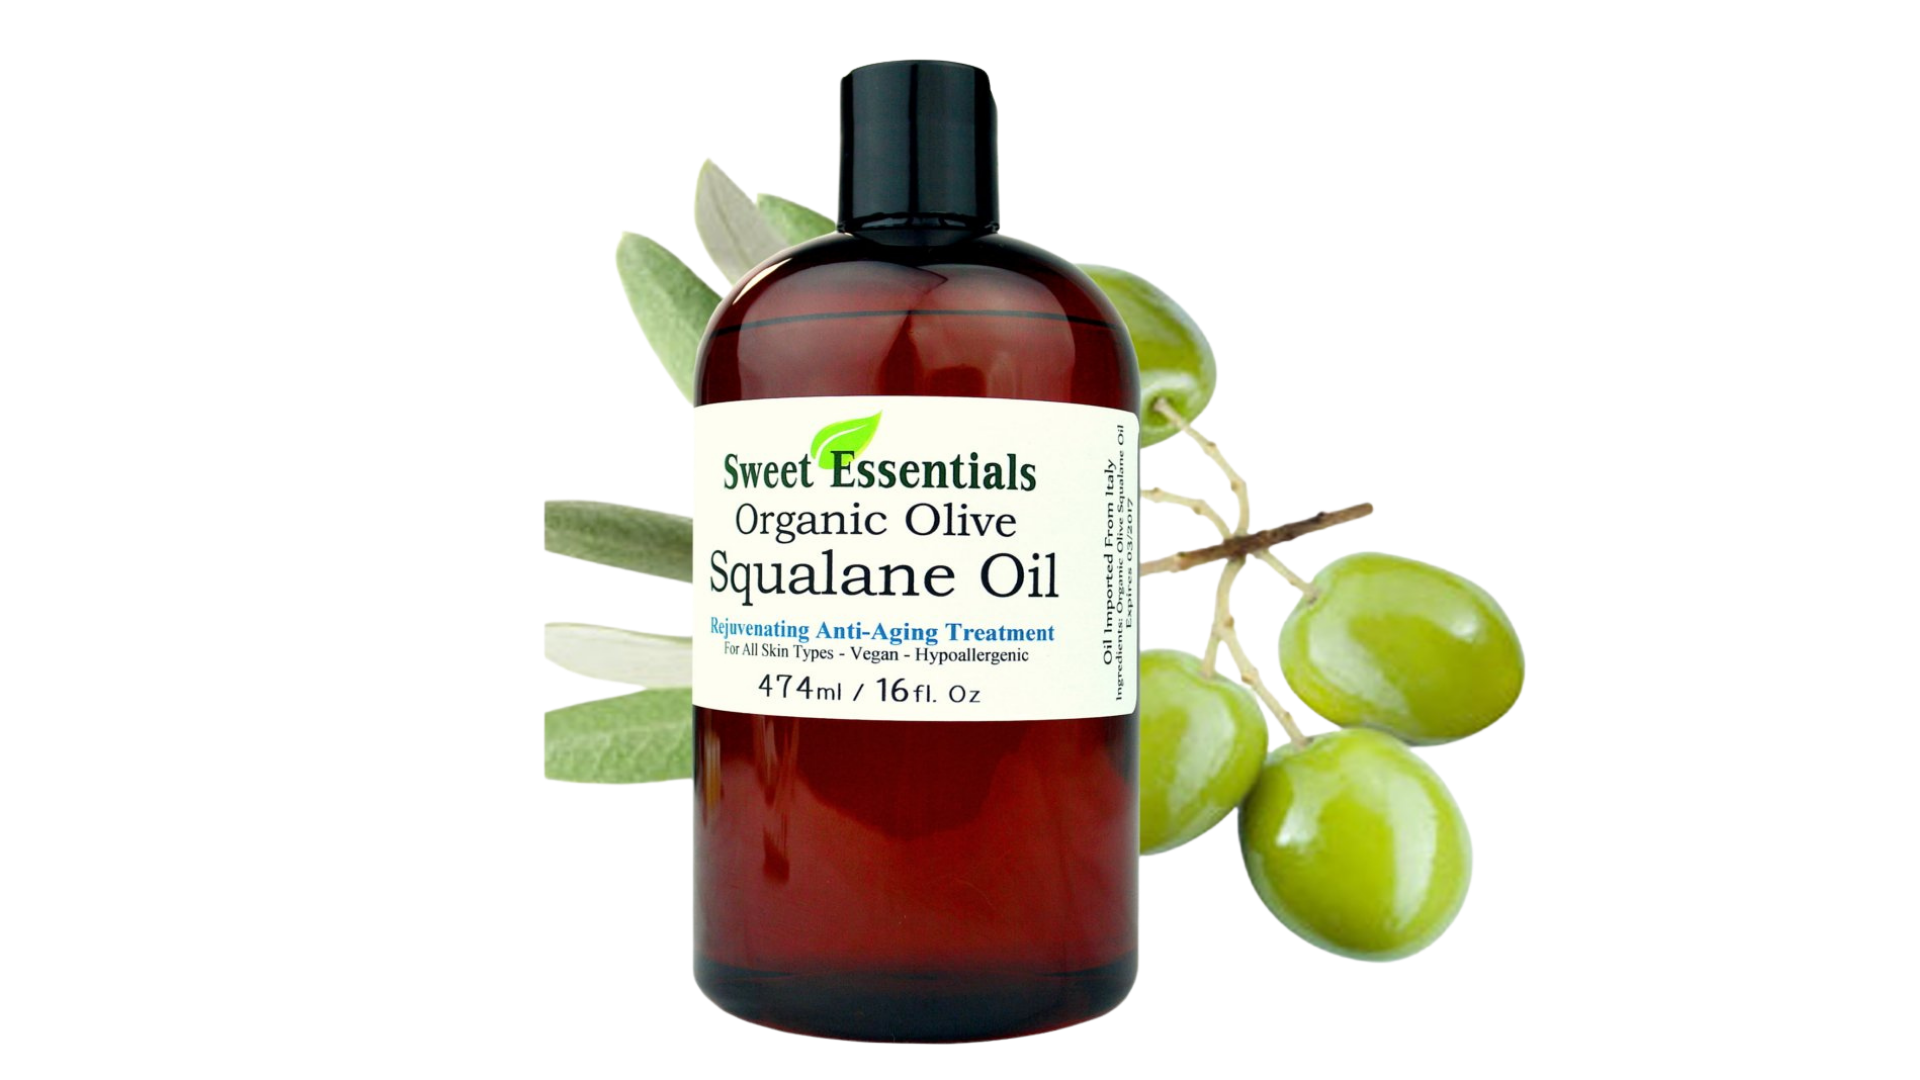 Sweet Essentials Pure Organic Squalane Oil skin and hair